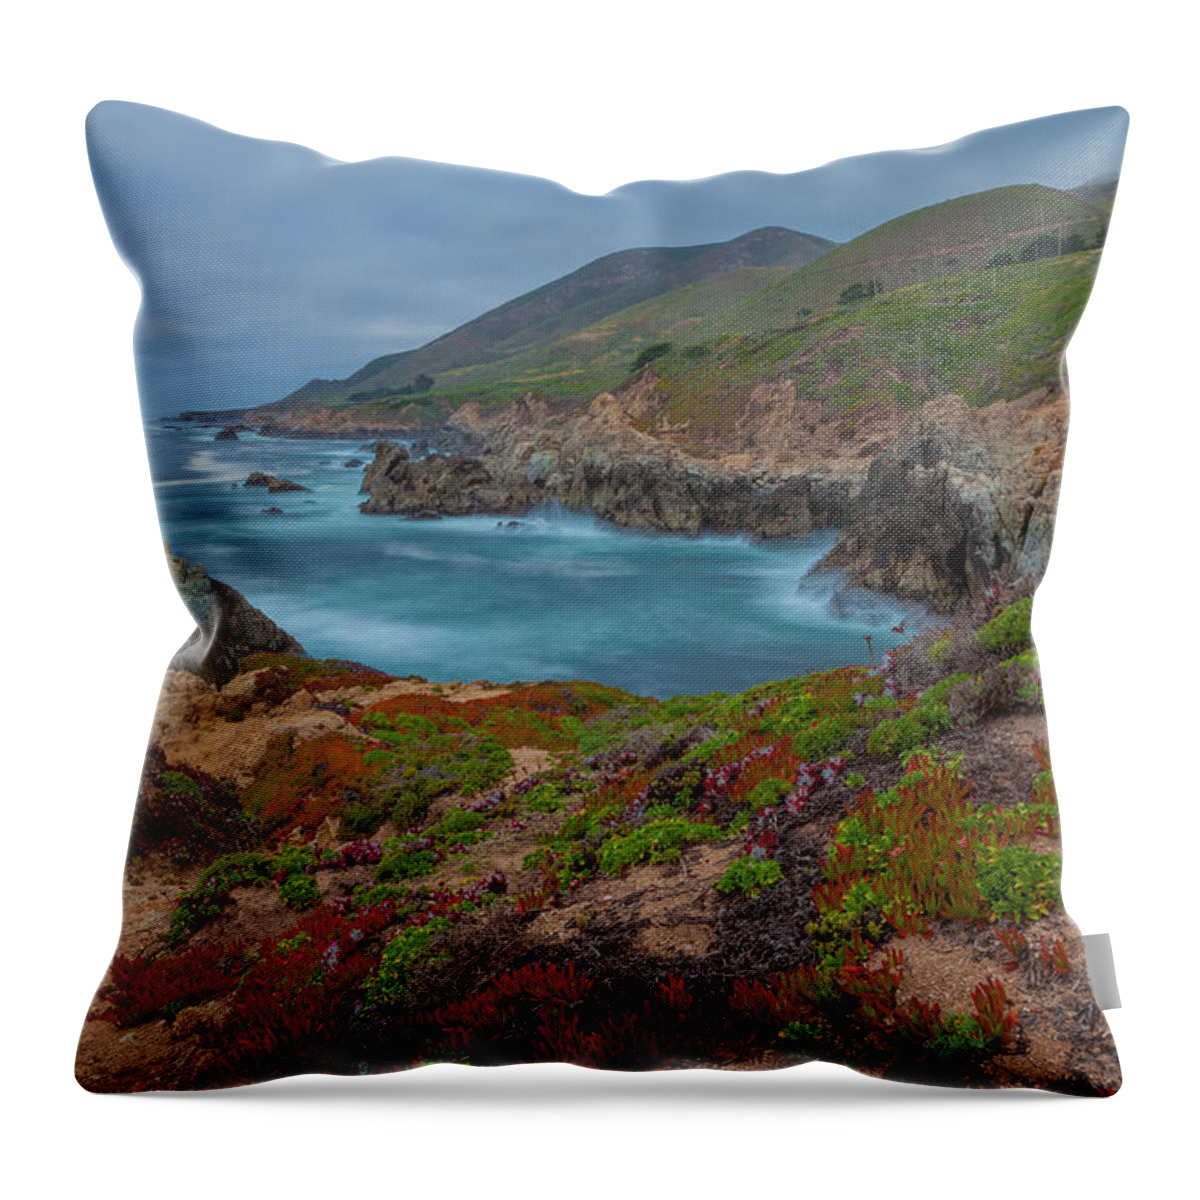 Landscape Throw Pillow featuring the photograph Springtime In Big Sur by Jonathan Nguyen